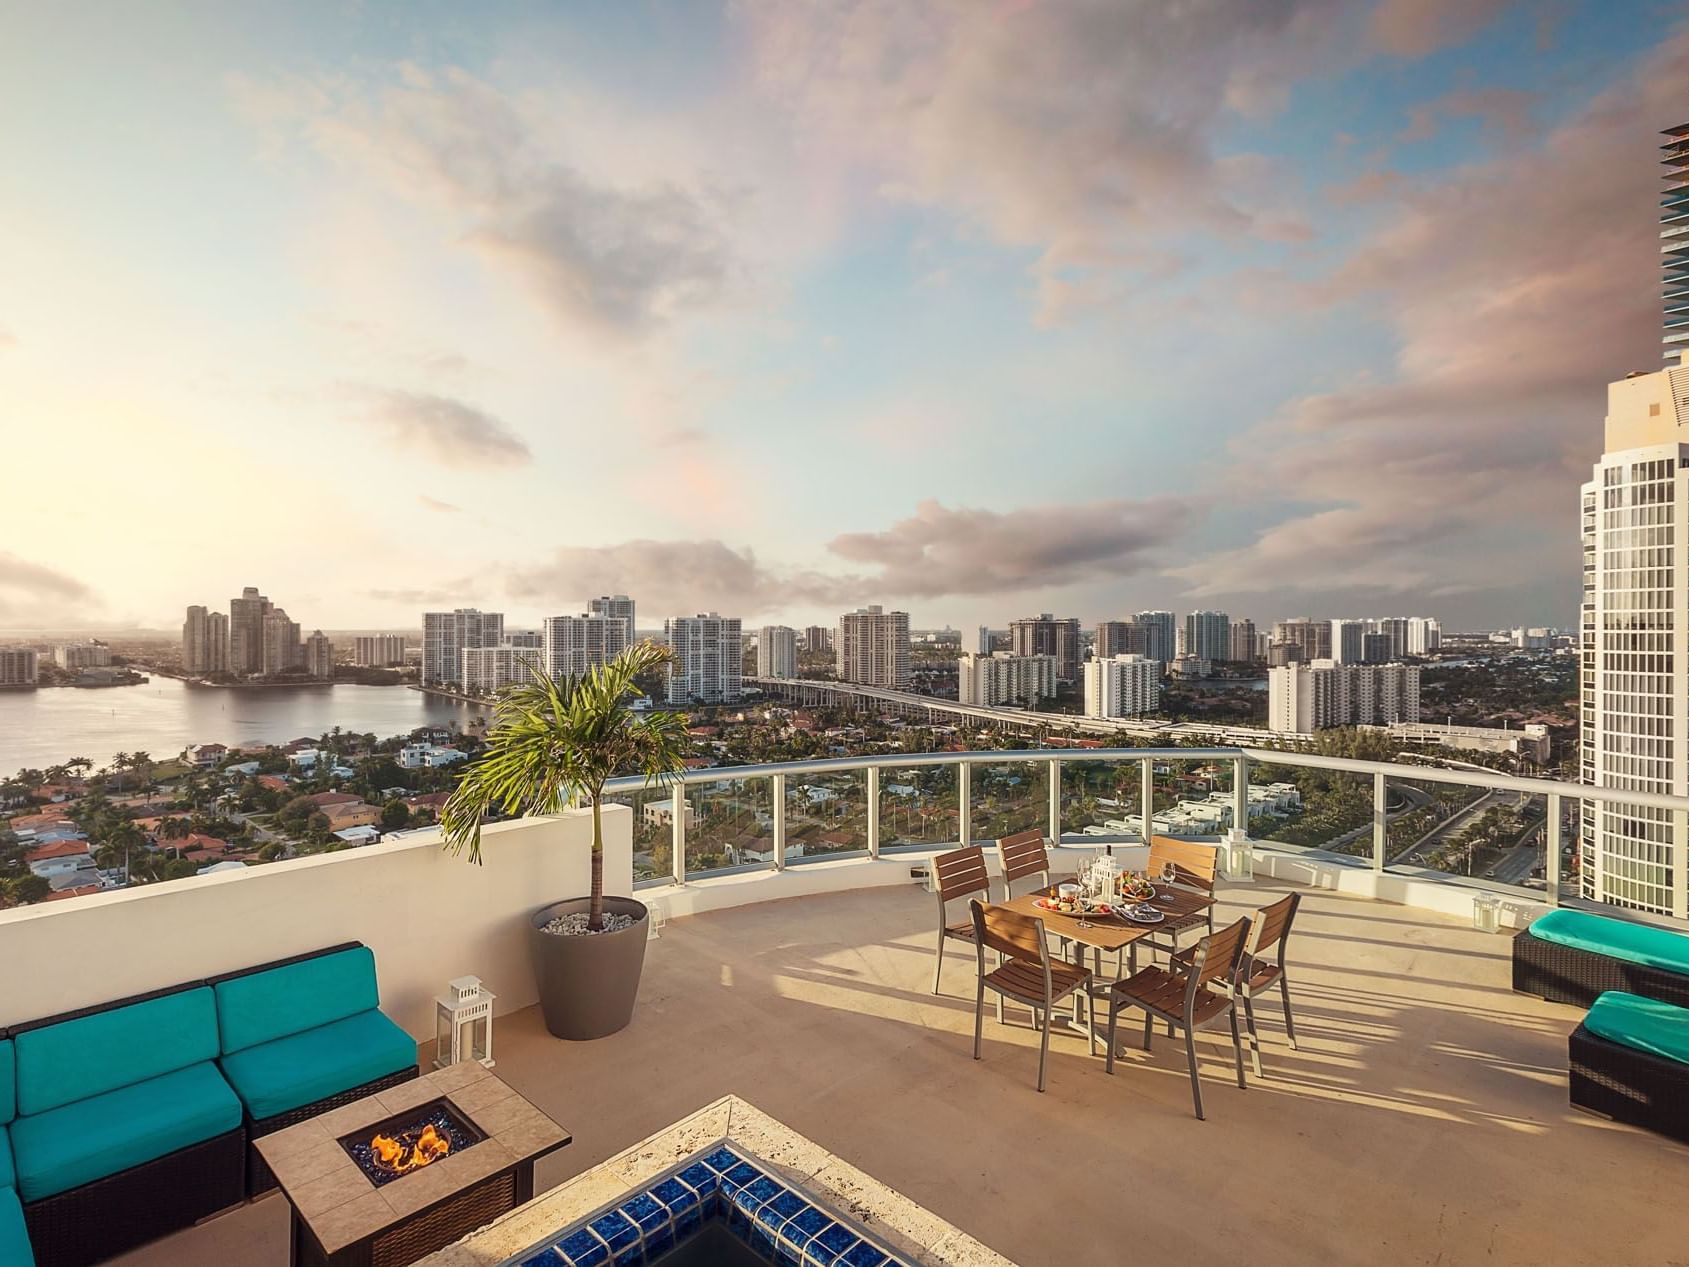 Terrace of 2-story Bayfront Penthouse at Marenas Resort Miami